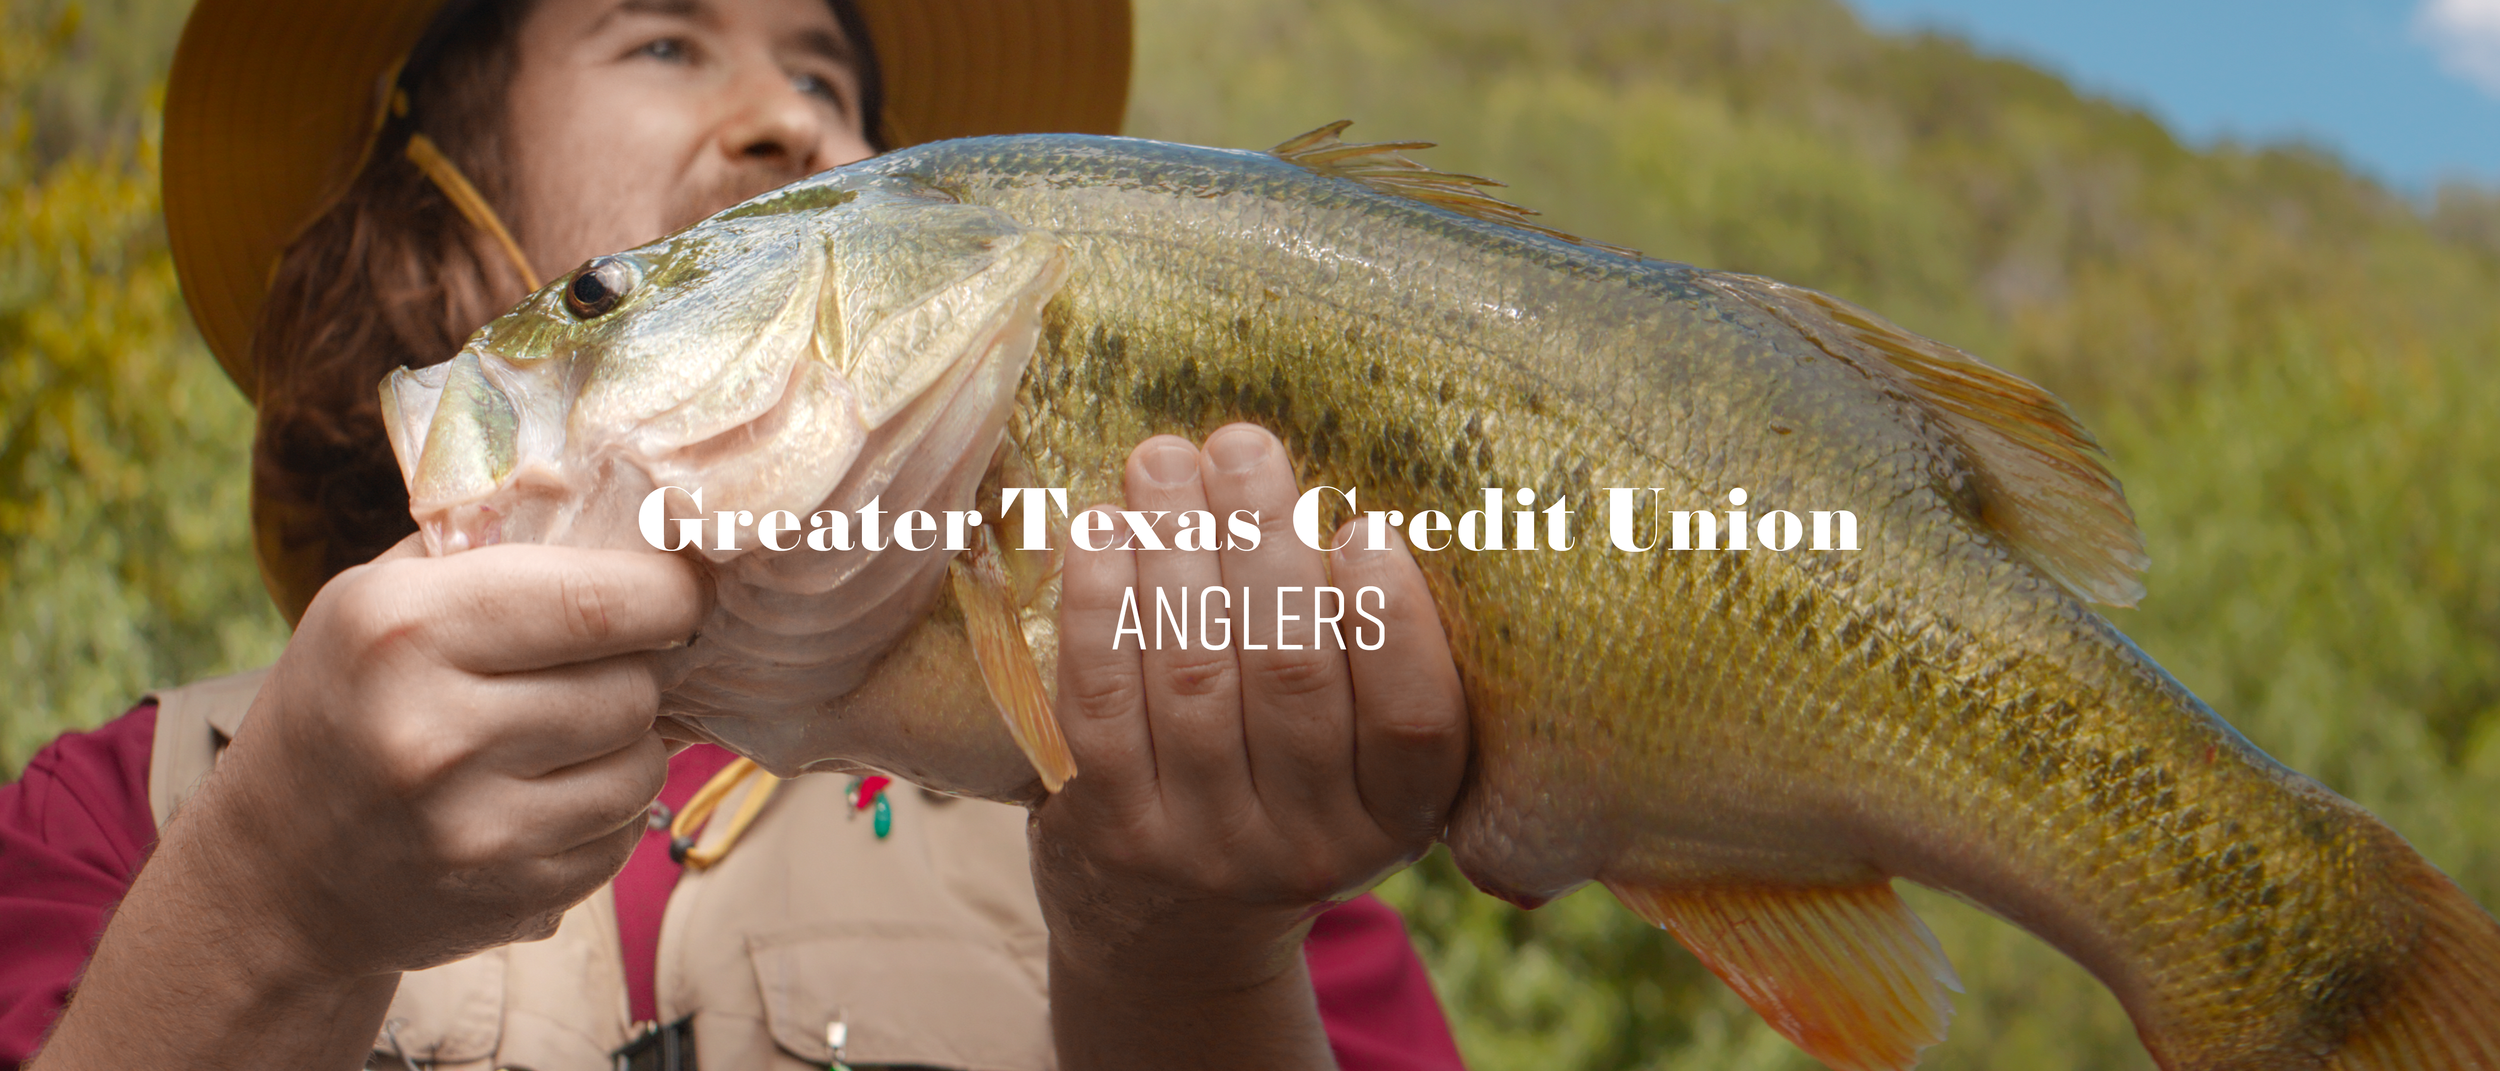 Anglers Website.png